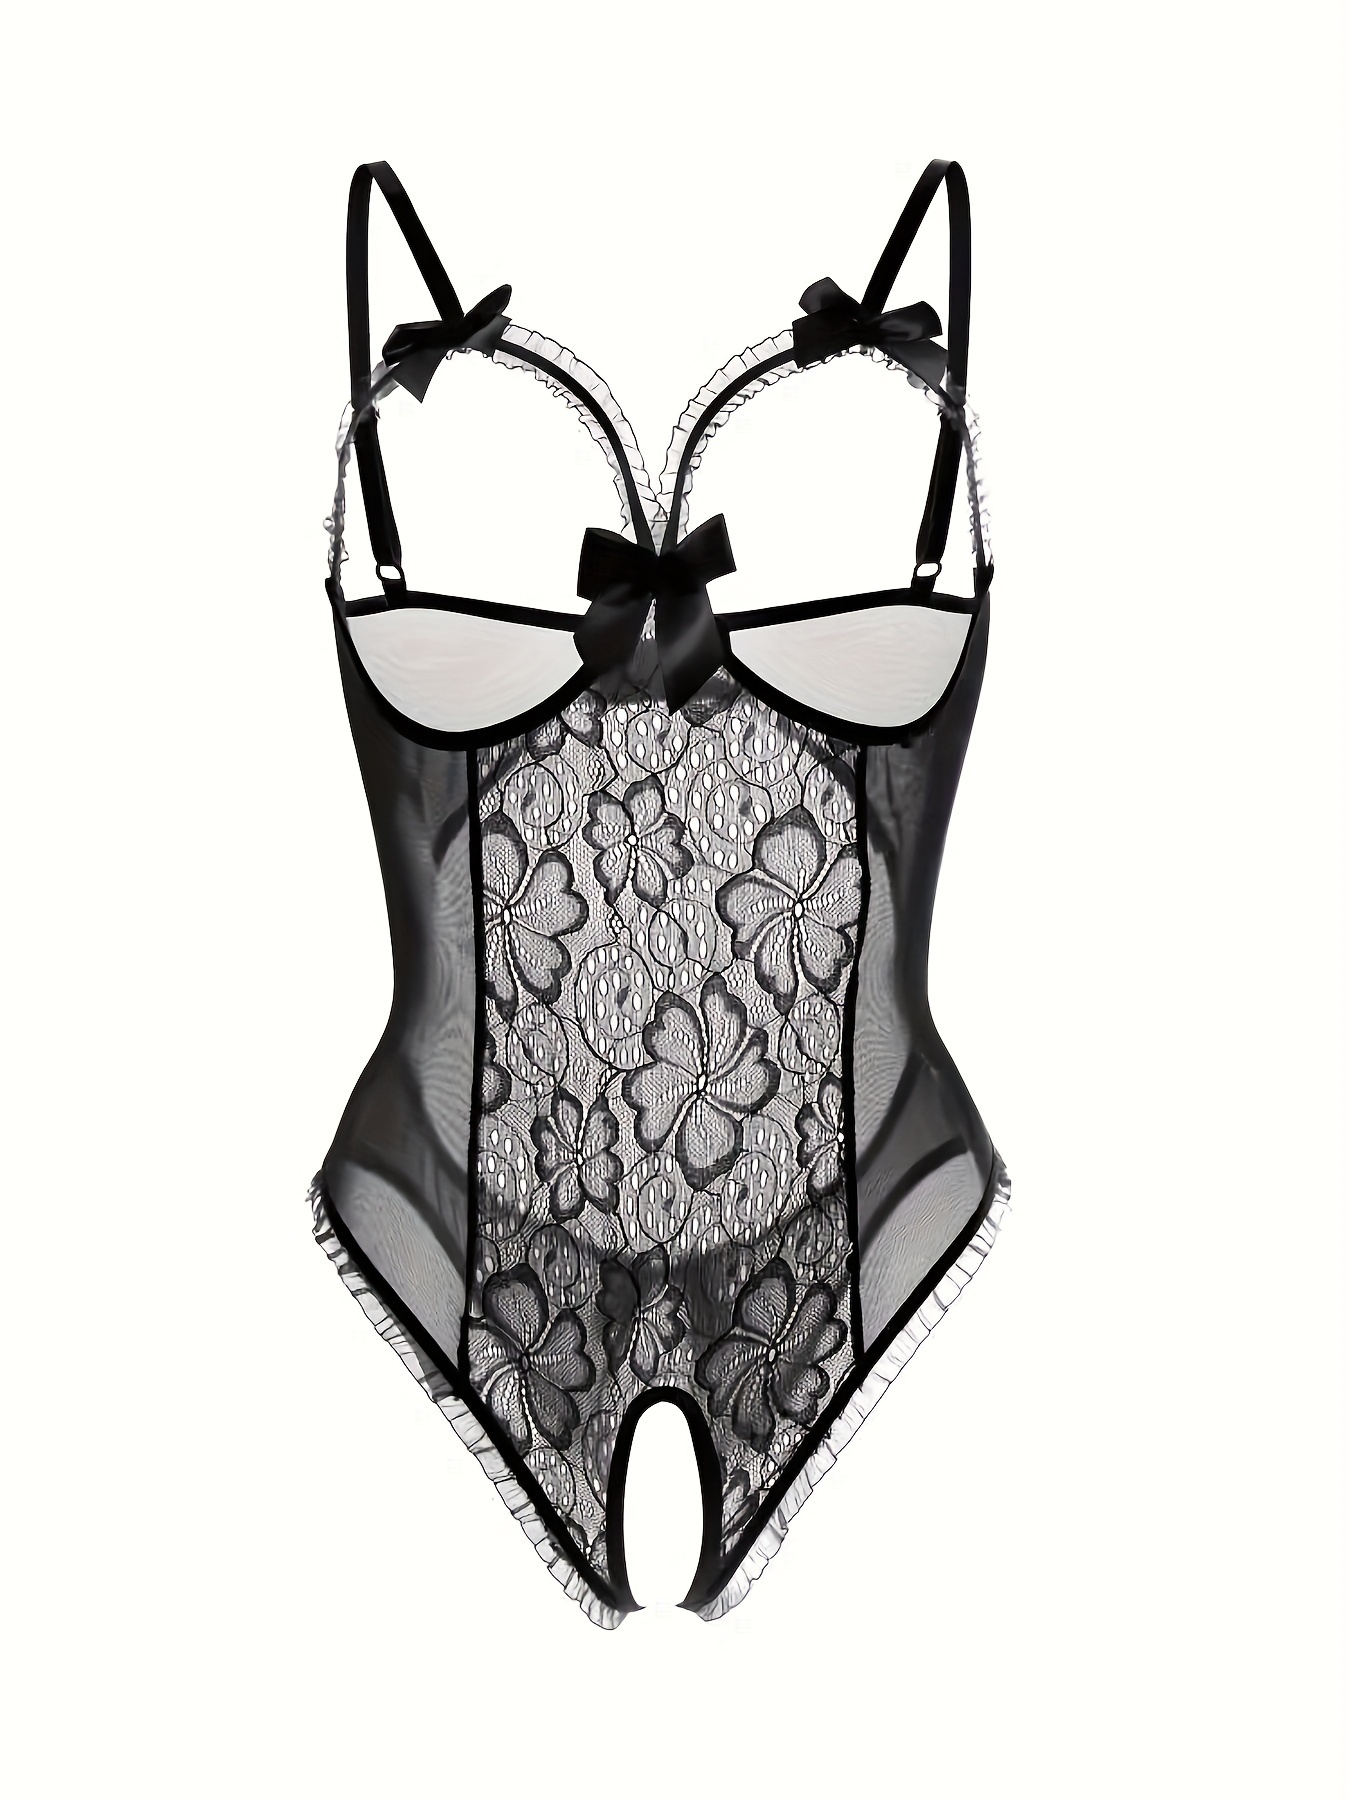  Adore Me, Sexy Lingerie For Women, Sashey Underwire  Bodysuit, Mesh wings and G-string bottom